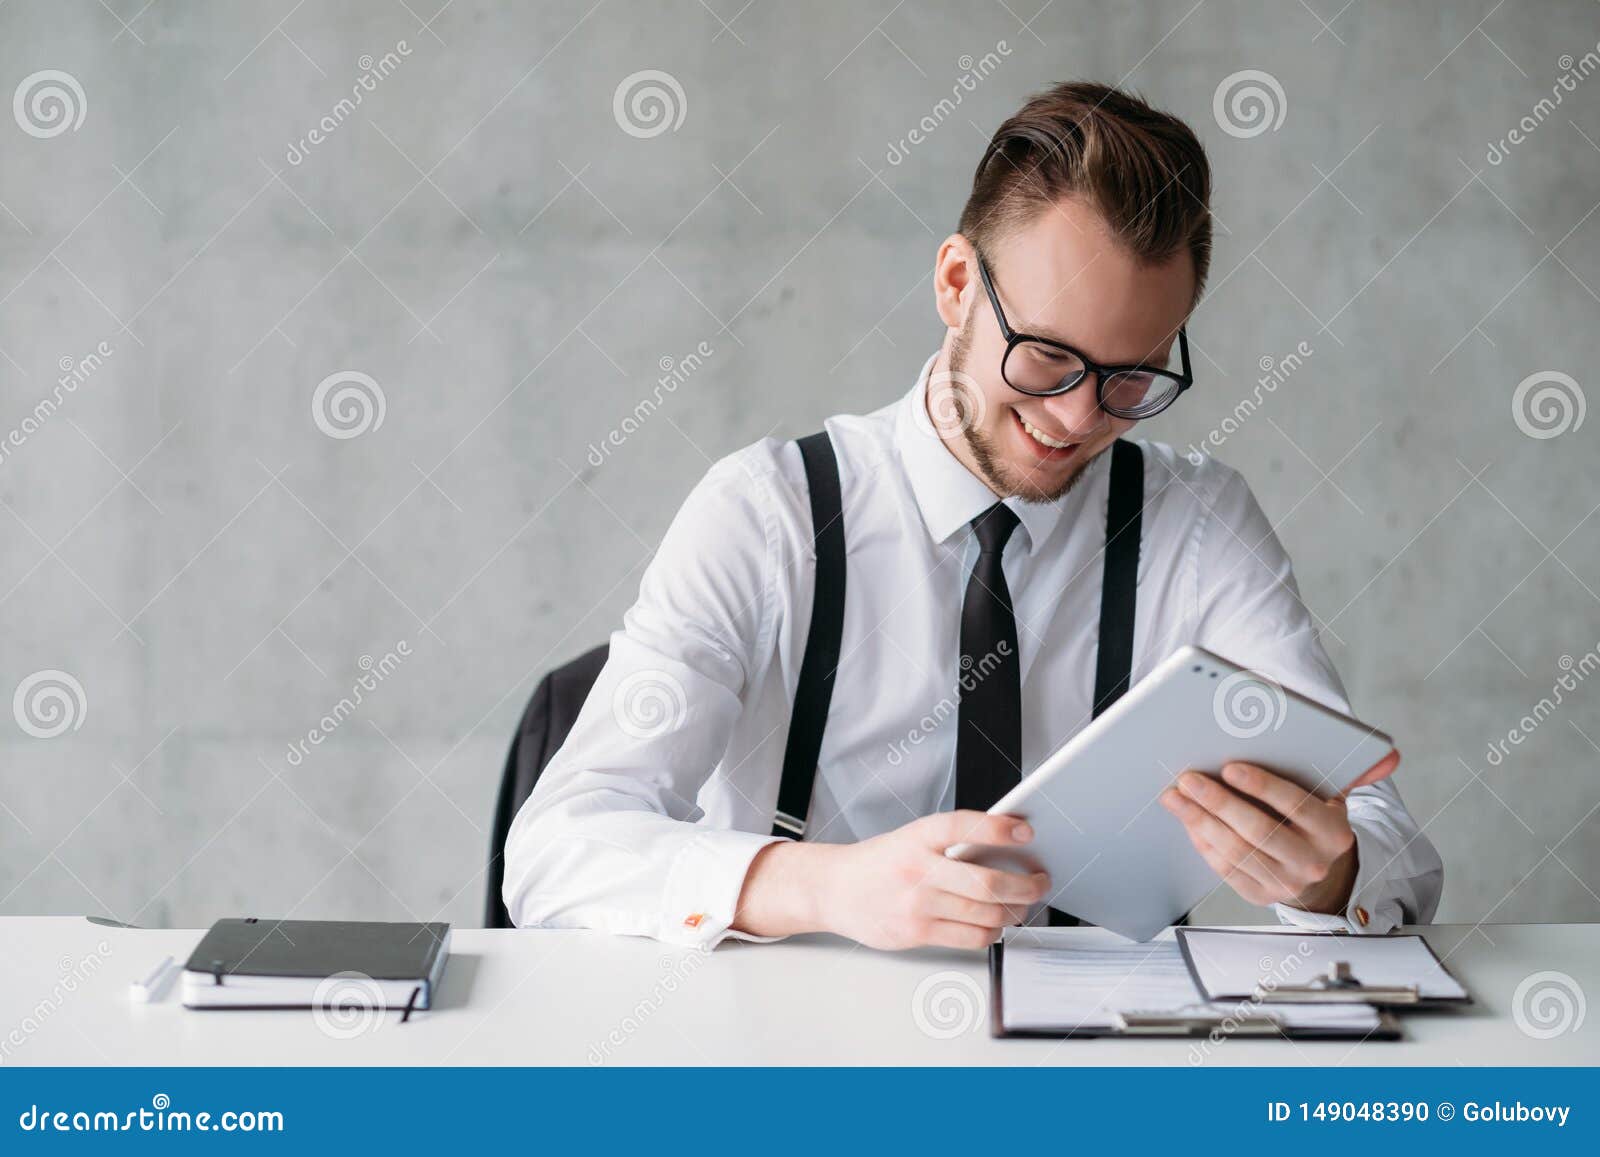 Successful Career Happy Young Office Worker Stock Photo Image Of